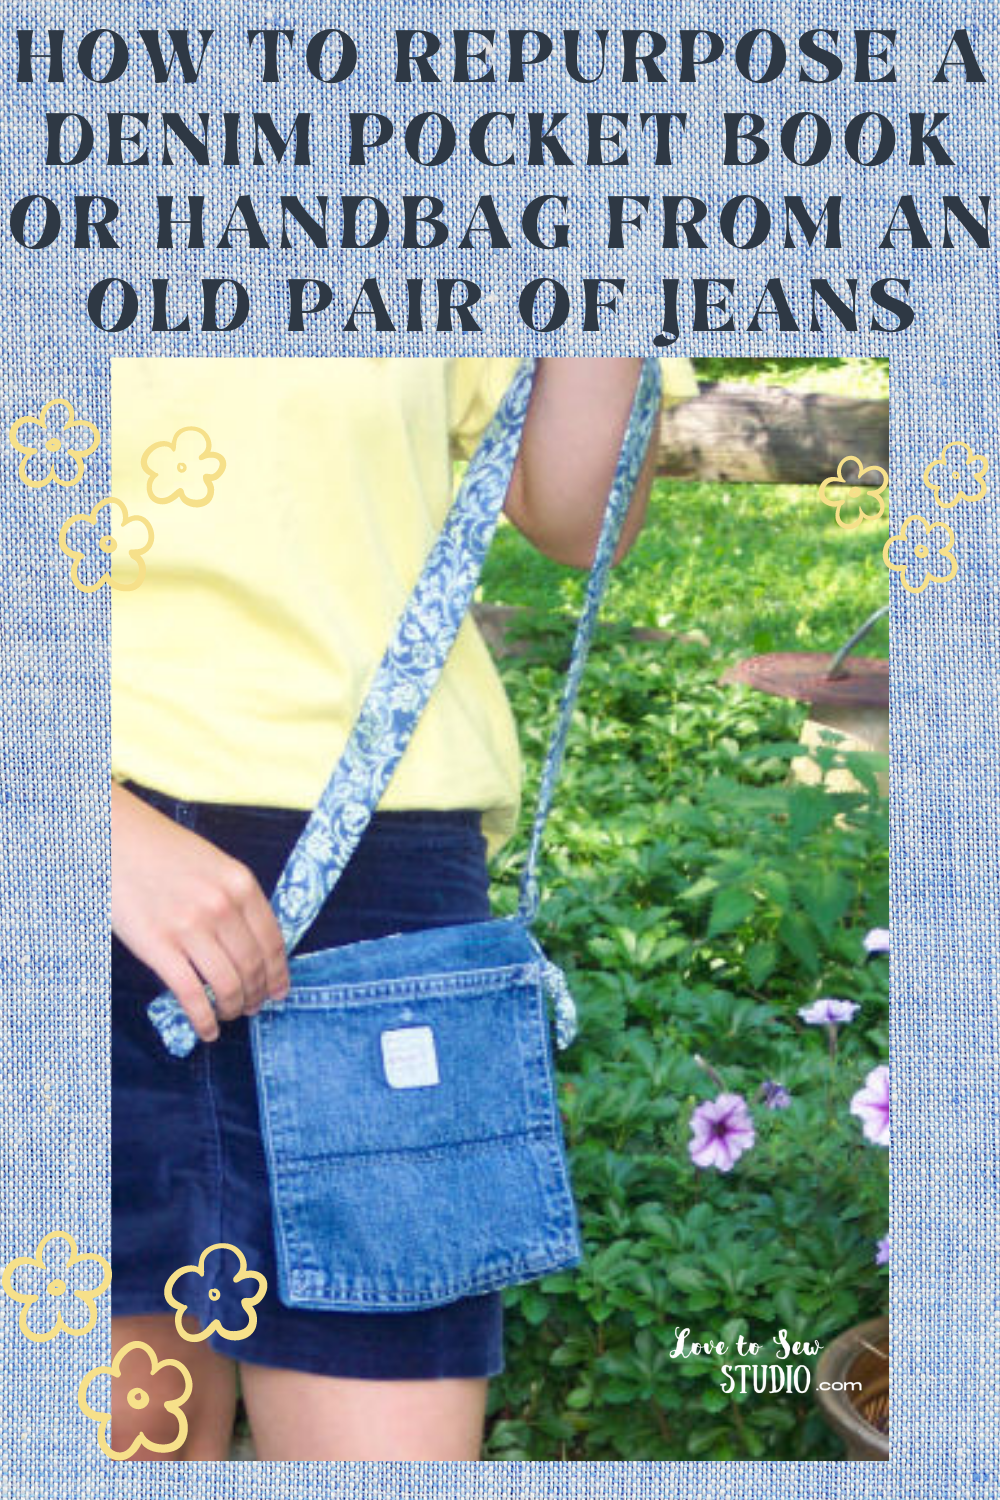 How to DIY Easy Handbag from Old Jeans | iCreativeIdeas.com | Old jeans,  Denim diy, Bag from old jeans